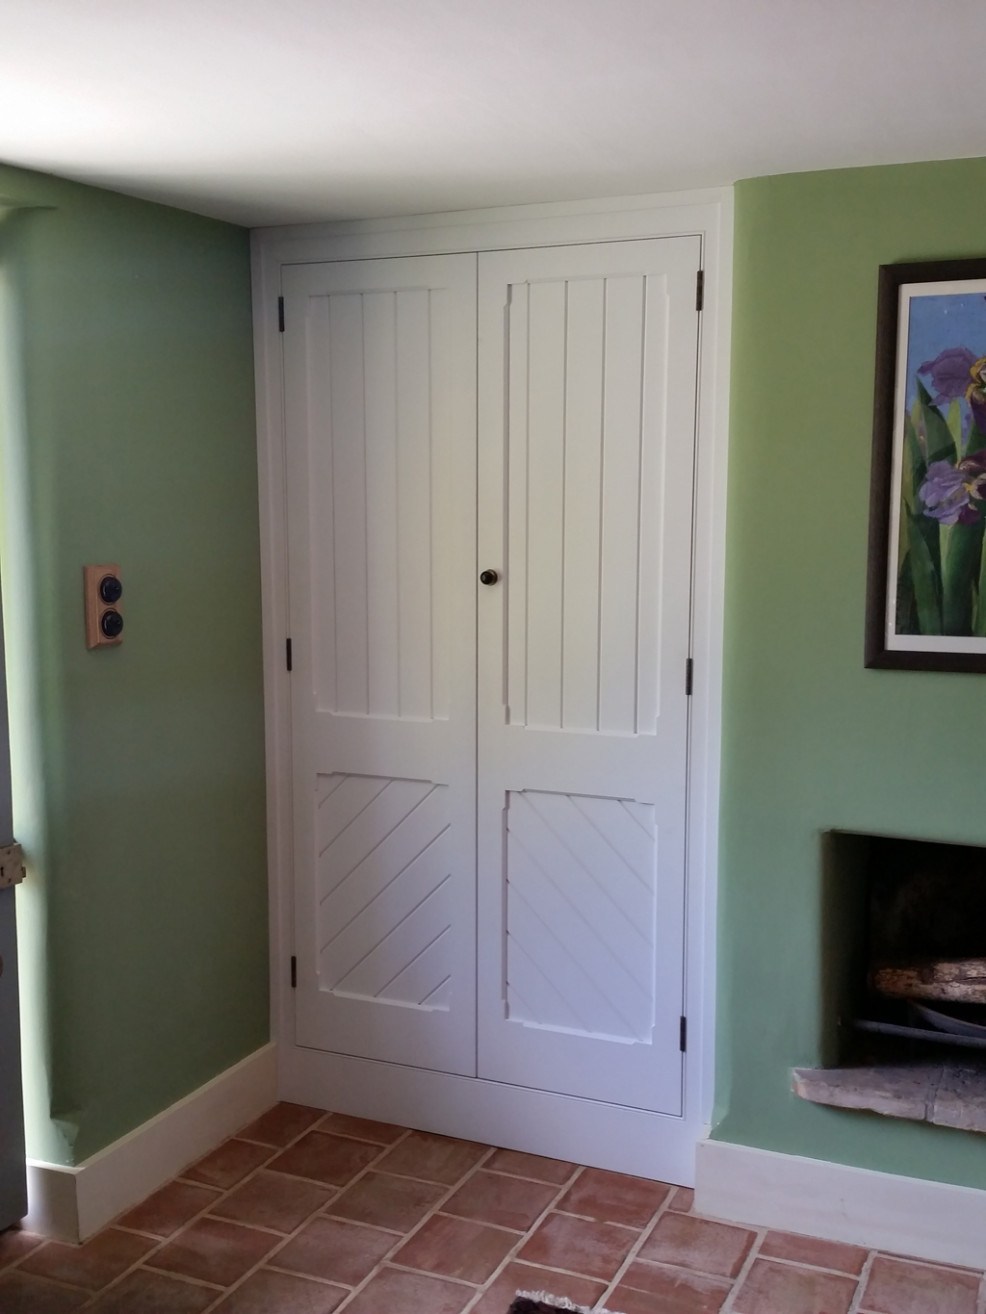 Victorian-style cupboard installed and painted